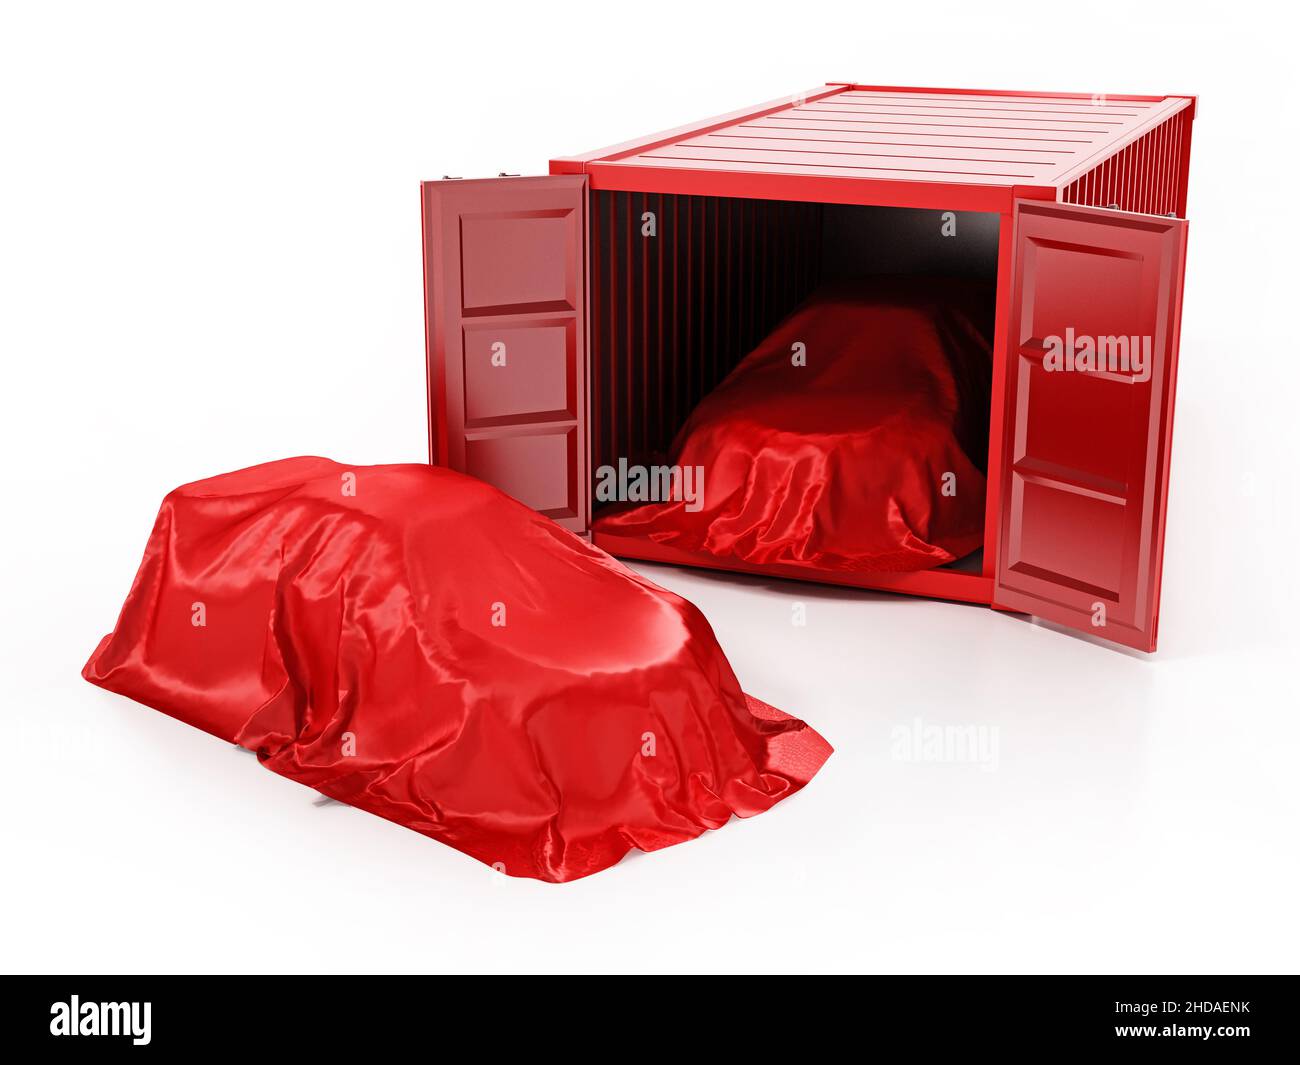 New unloaded cars covered with red clothes and shipping container isolated on white background. 3D illustration. Stock Photo